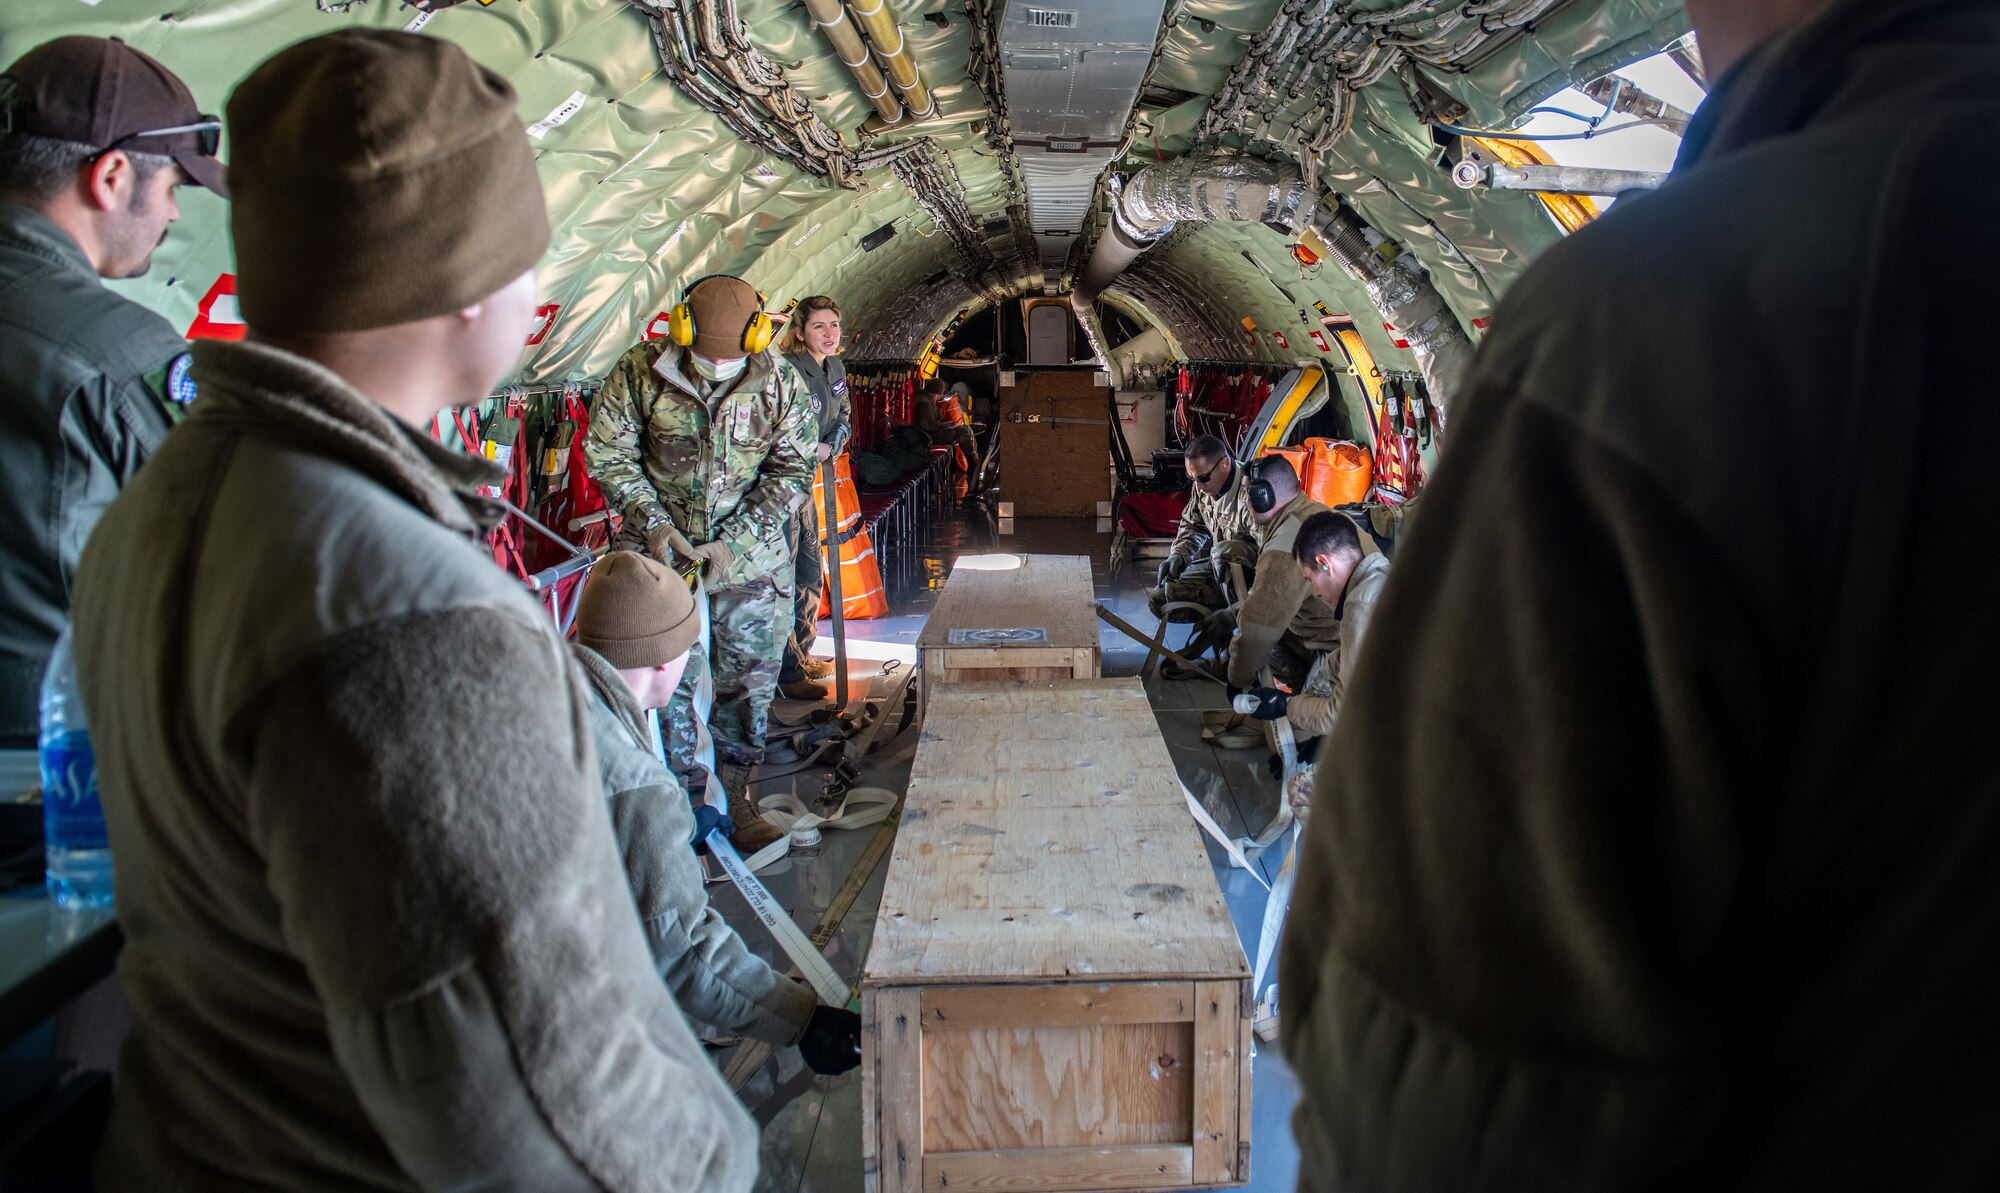 Air Force reservists from the 67th Aerial Port Squadron conduct a cargo loading exercise involving the transportation of human remains Feb. 5, 2022 at Hill Air Force Base, Utah